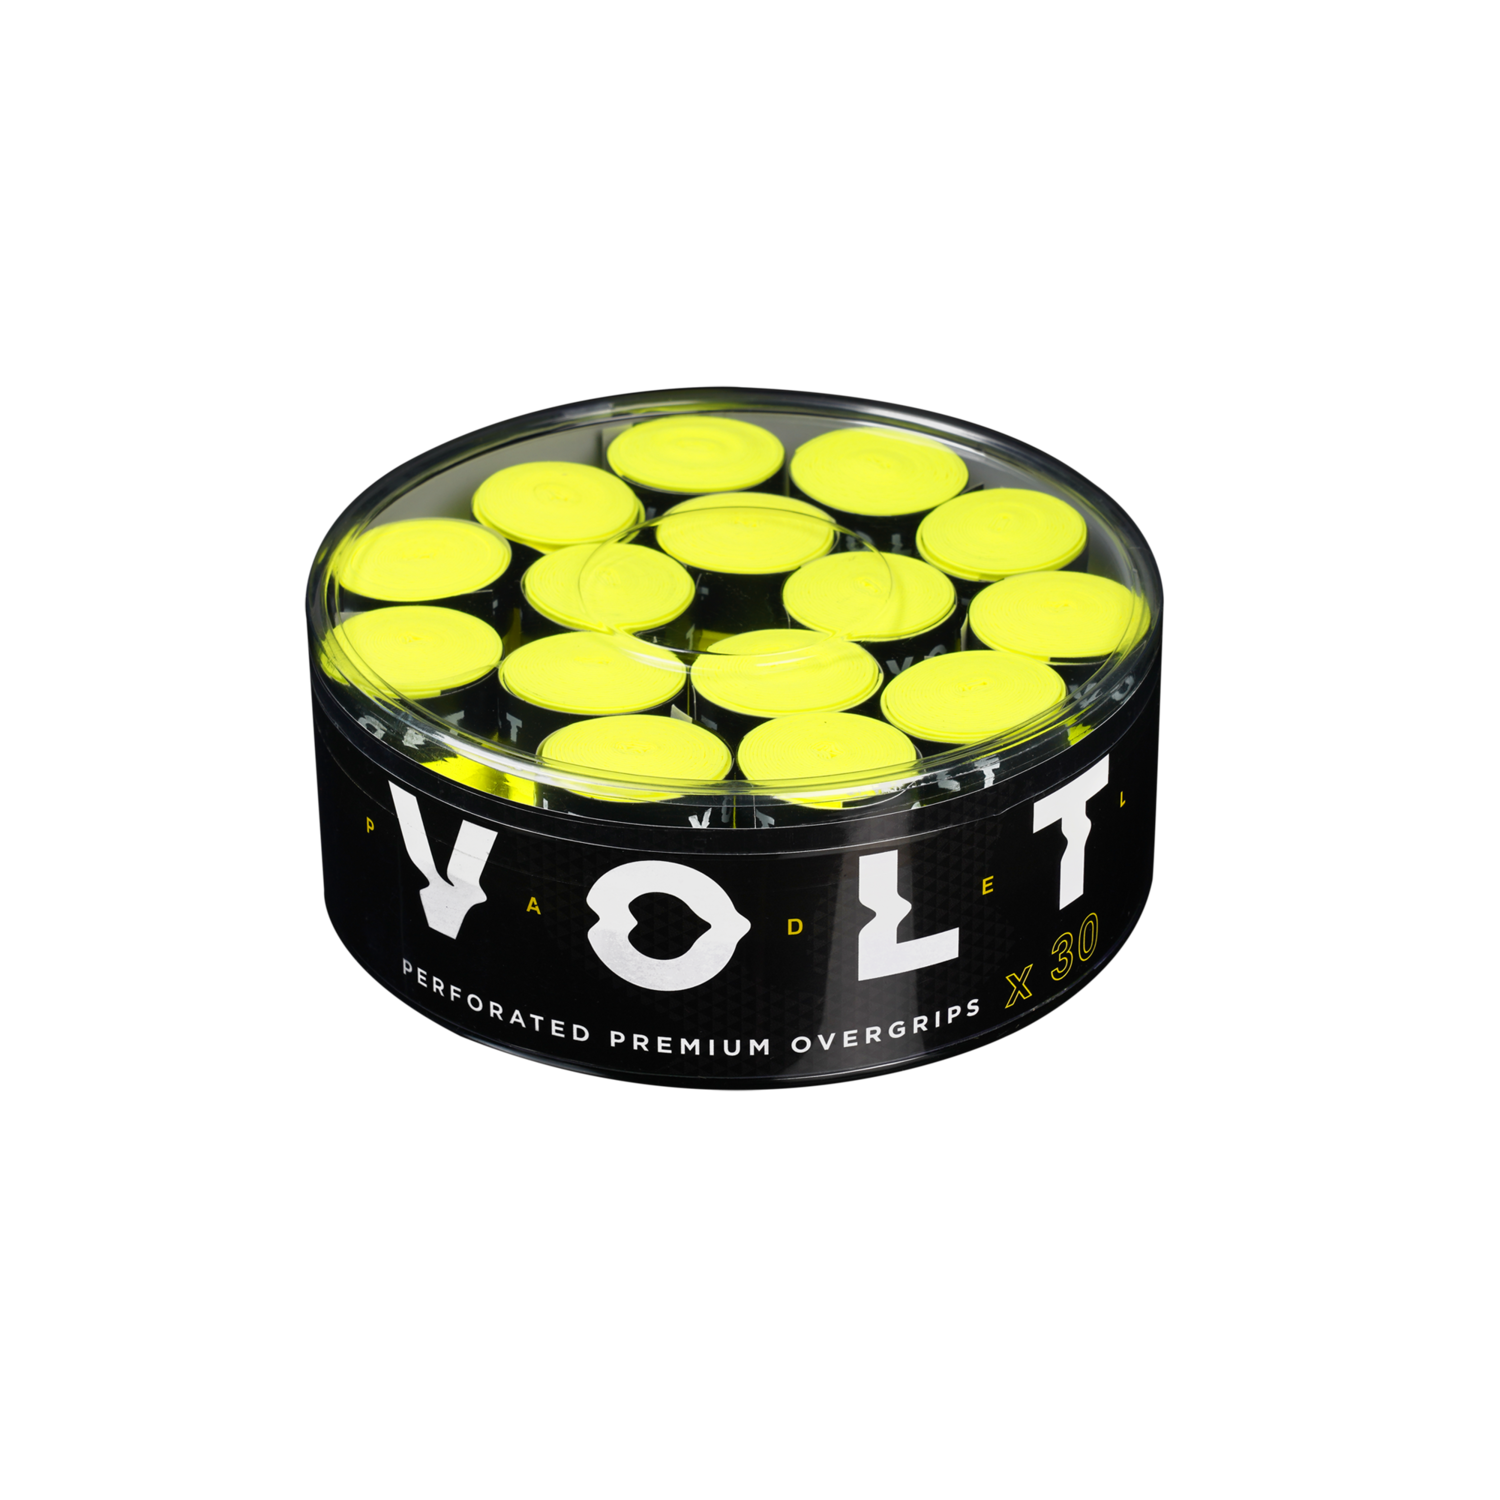 Pack 10 Over Grip Para Tenis o Paddle Color Surtido